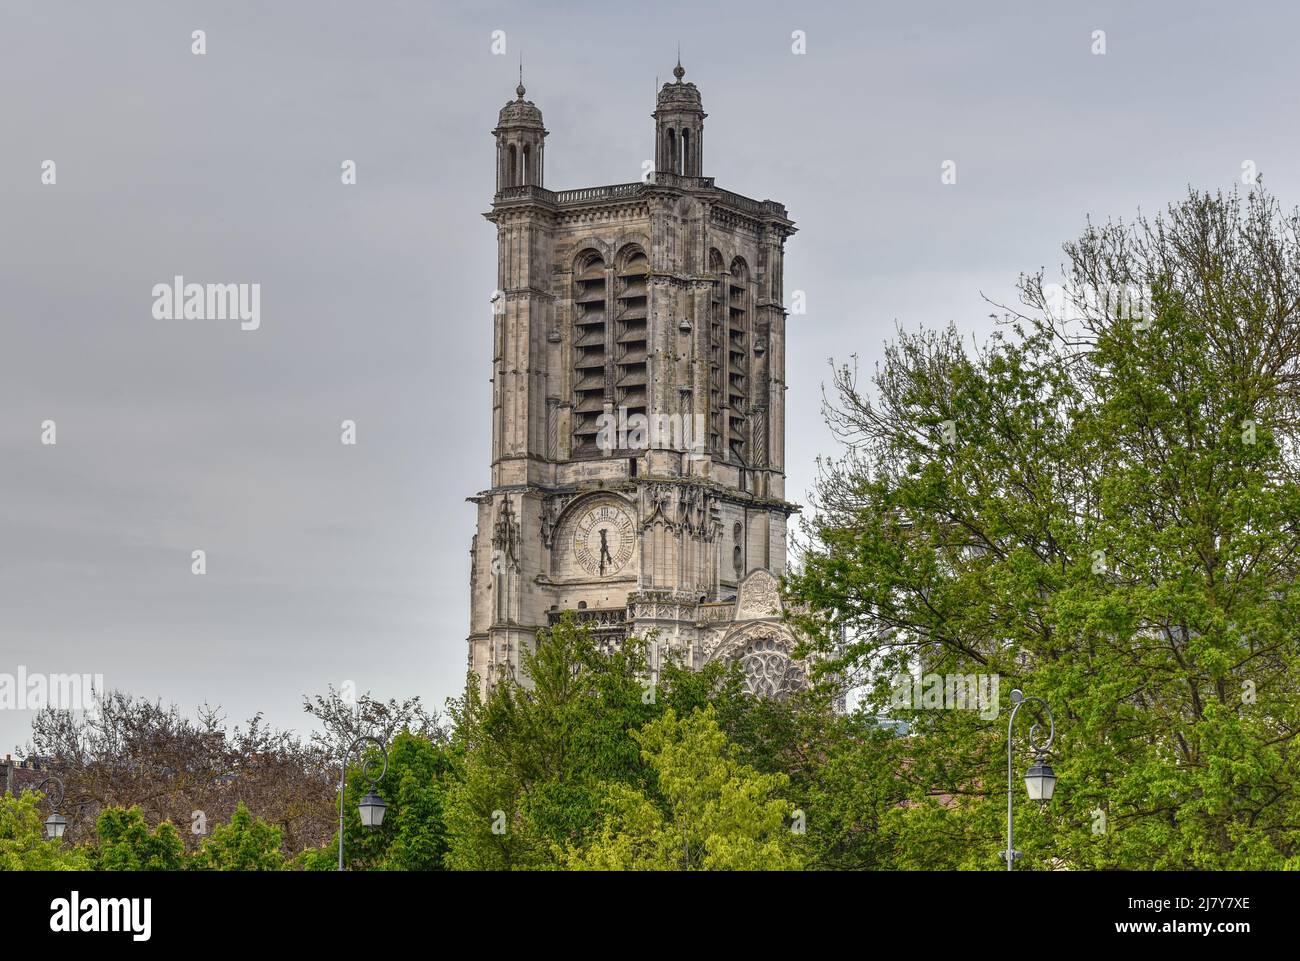 The Cathedral in the beautiful mediaeval city of Troyes in the Champagne region of France Stock Photo